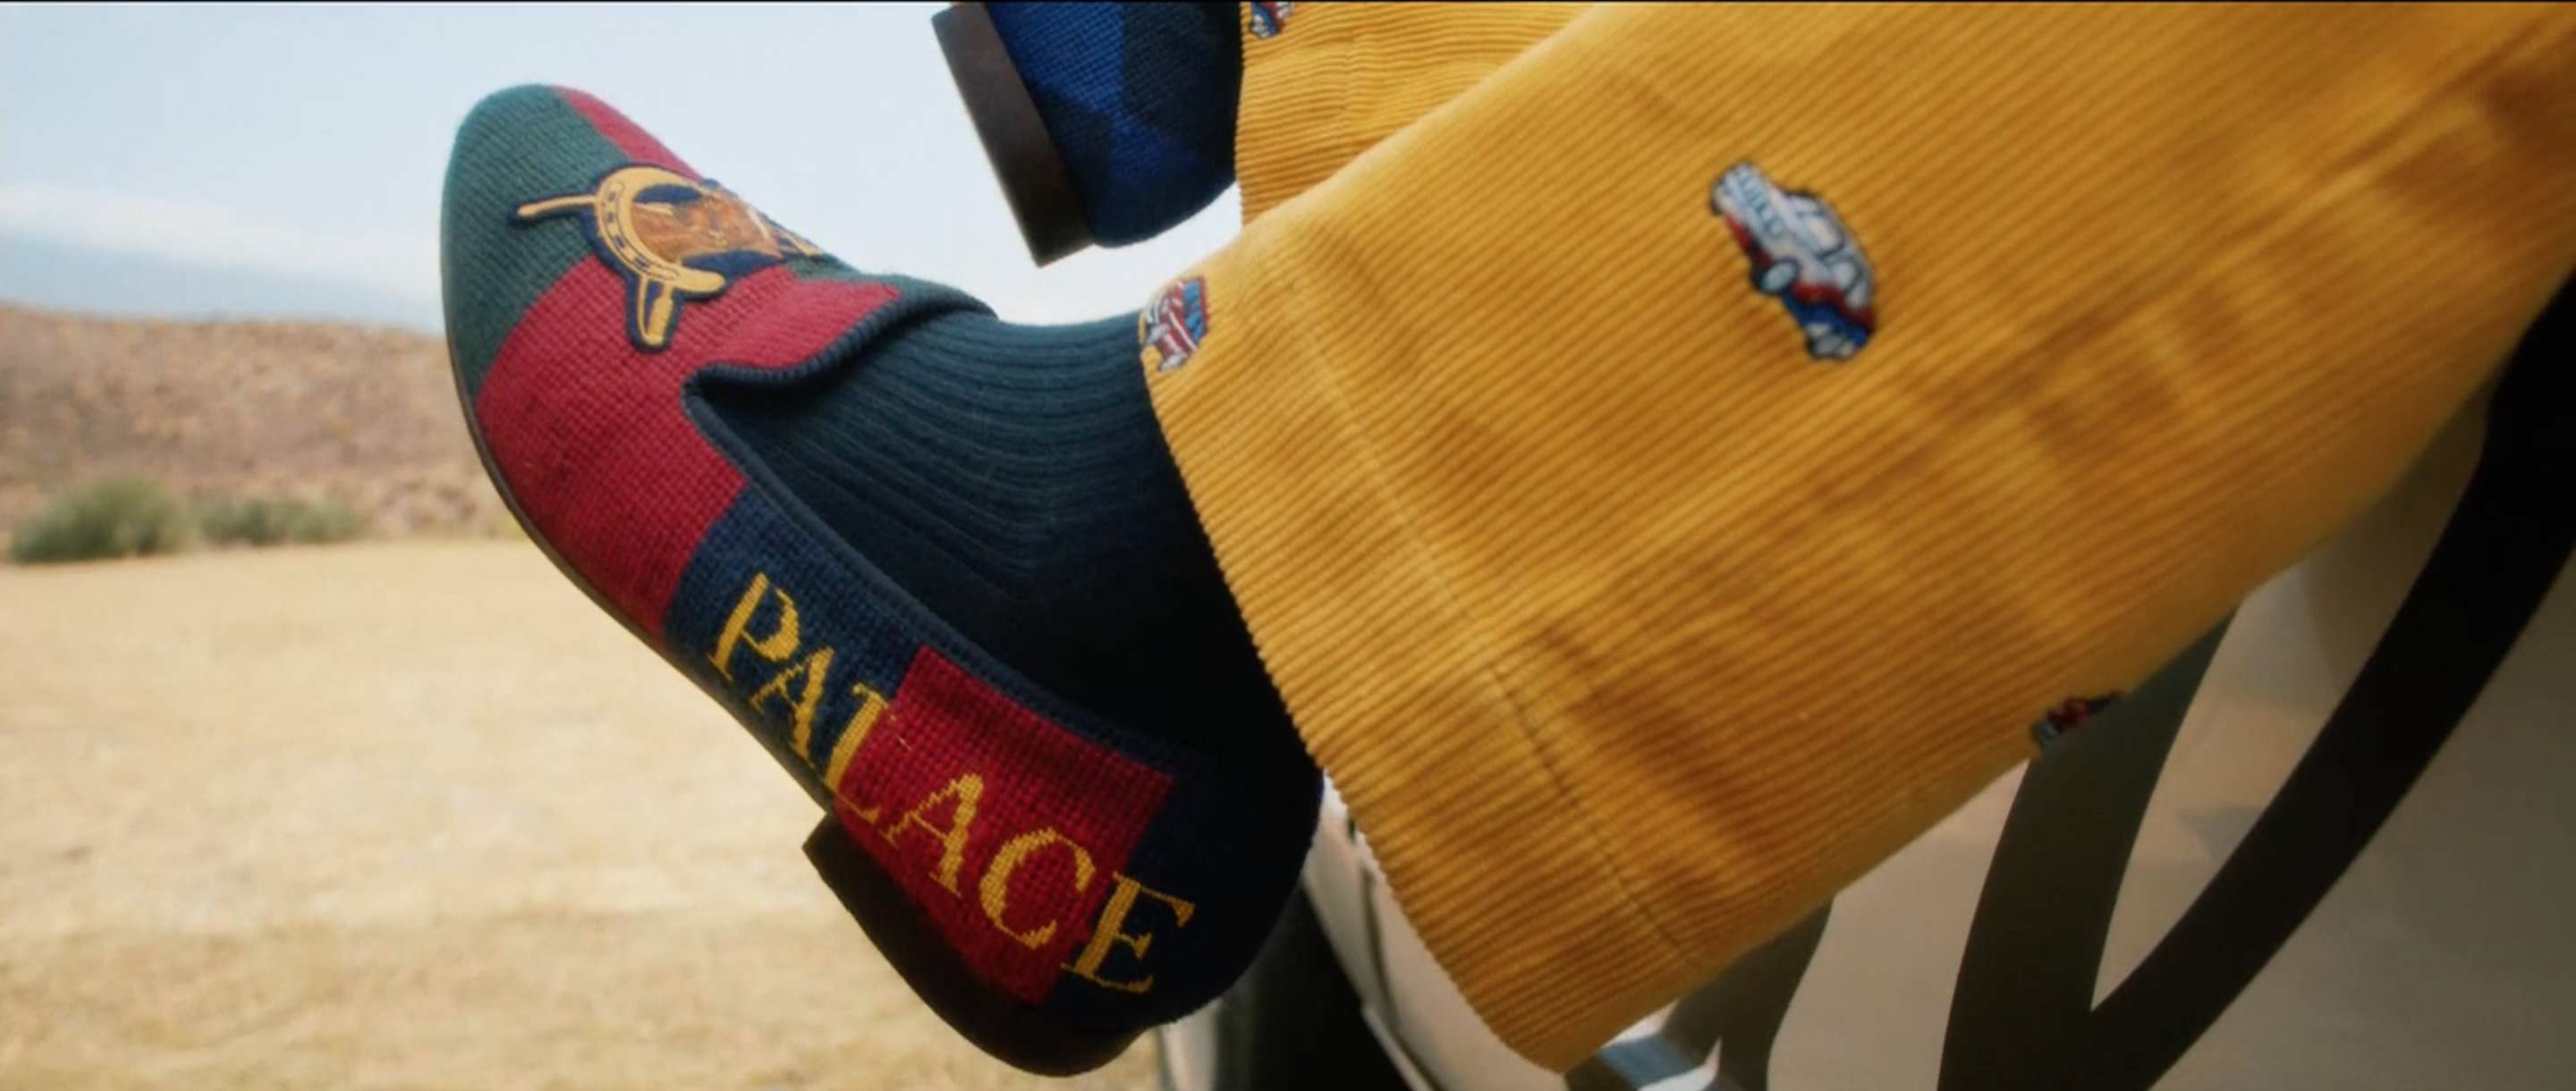 Polo Ralph Lauren Returns to Skateboarding for Its Latest Collab